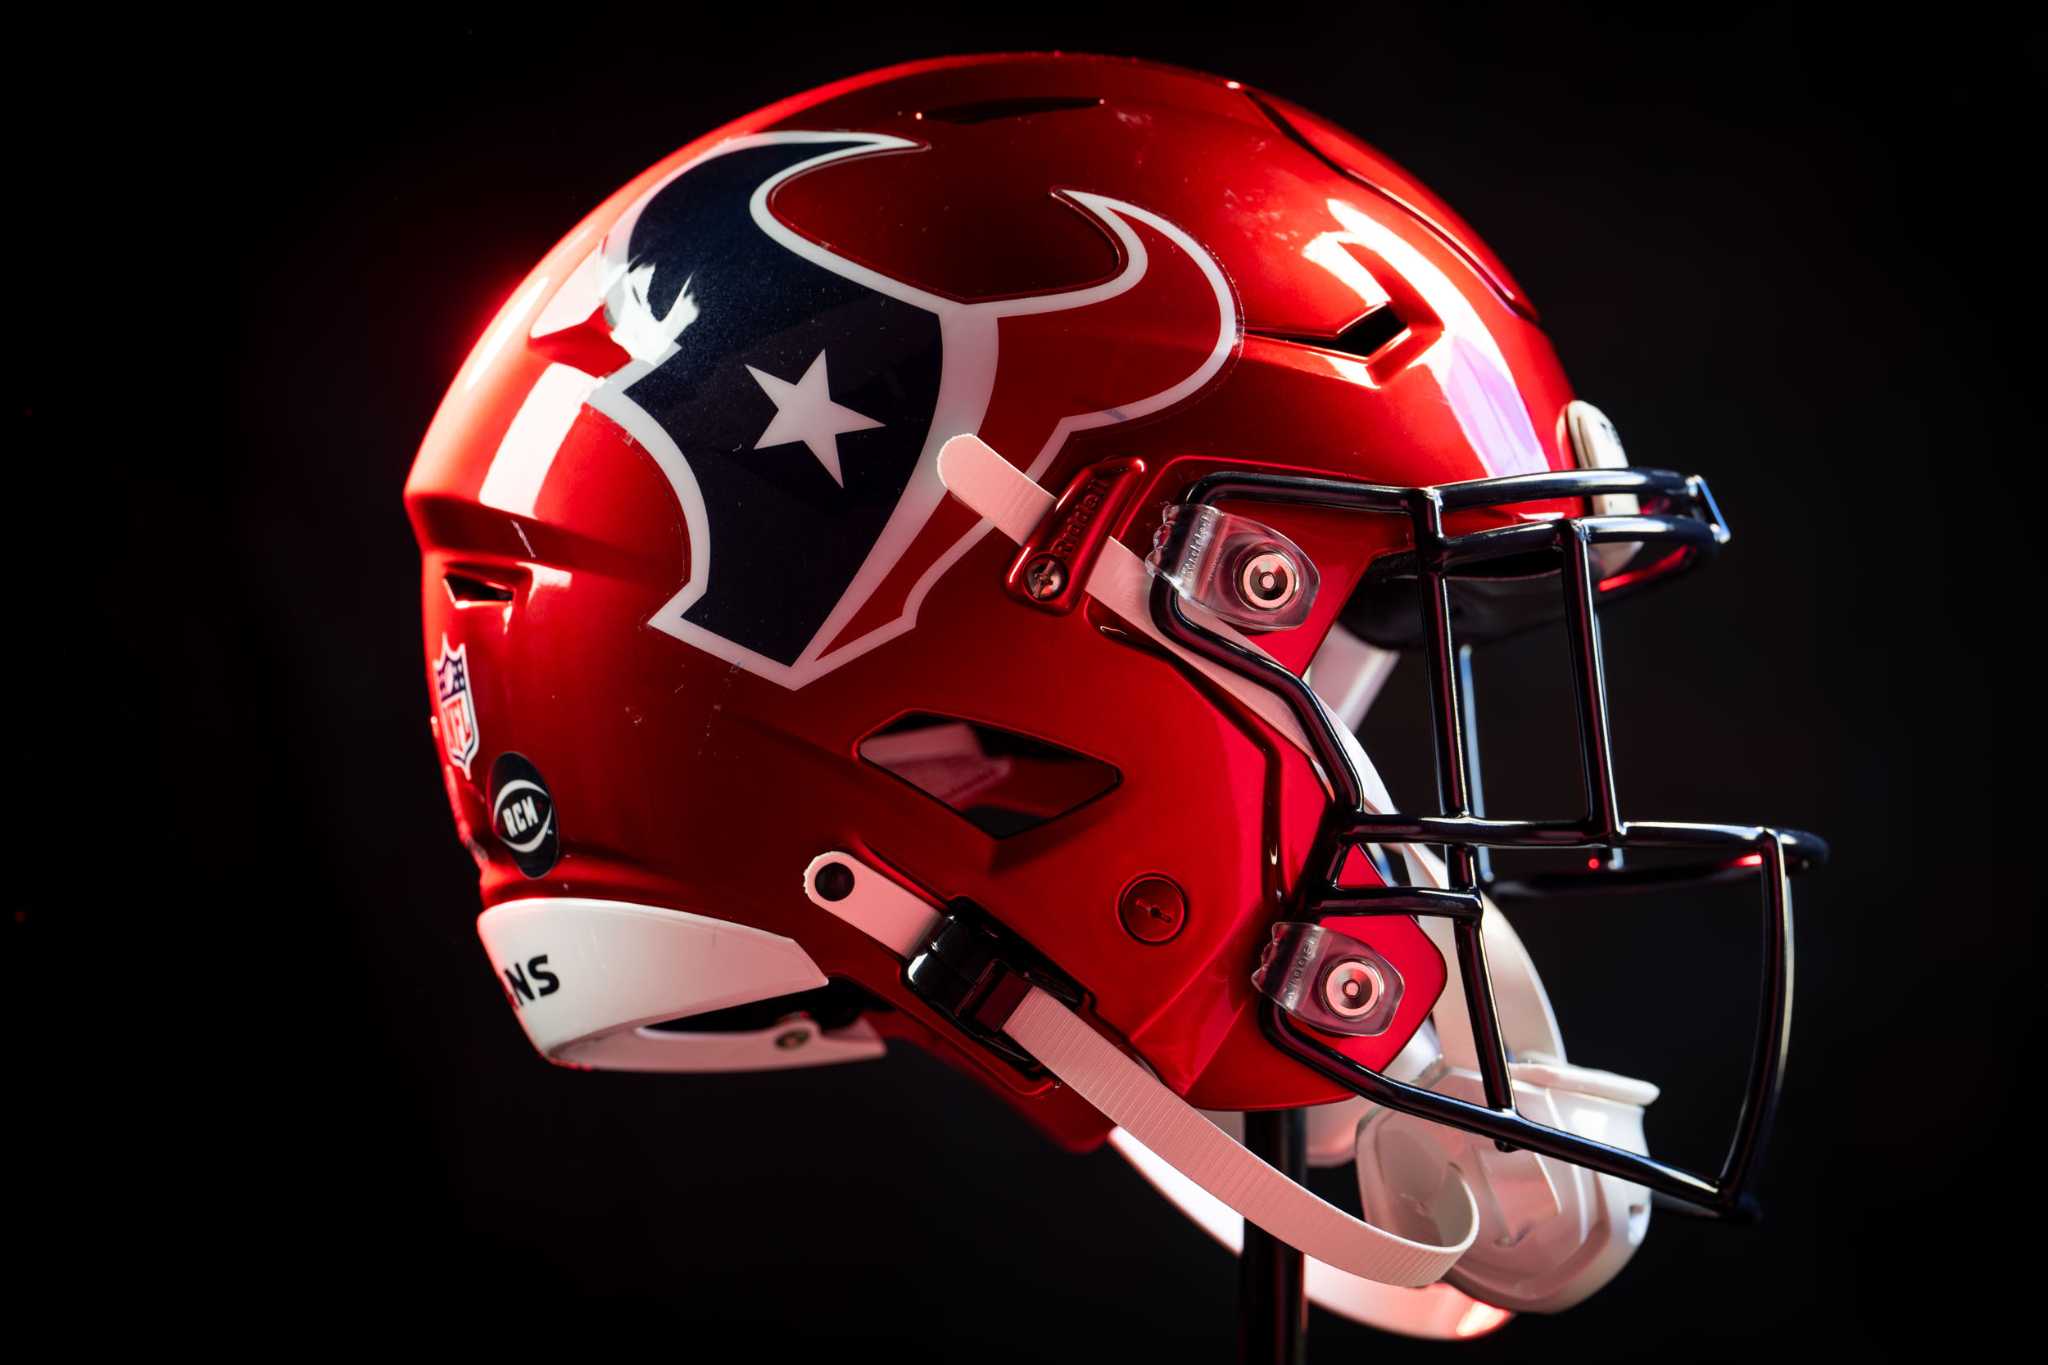 Houston Texans Franchise could use a new brand